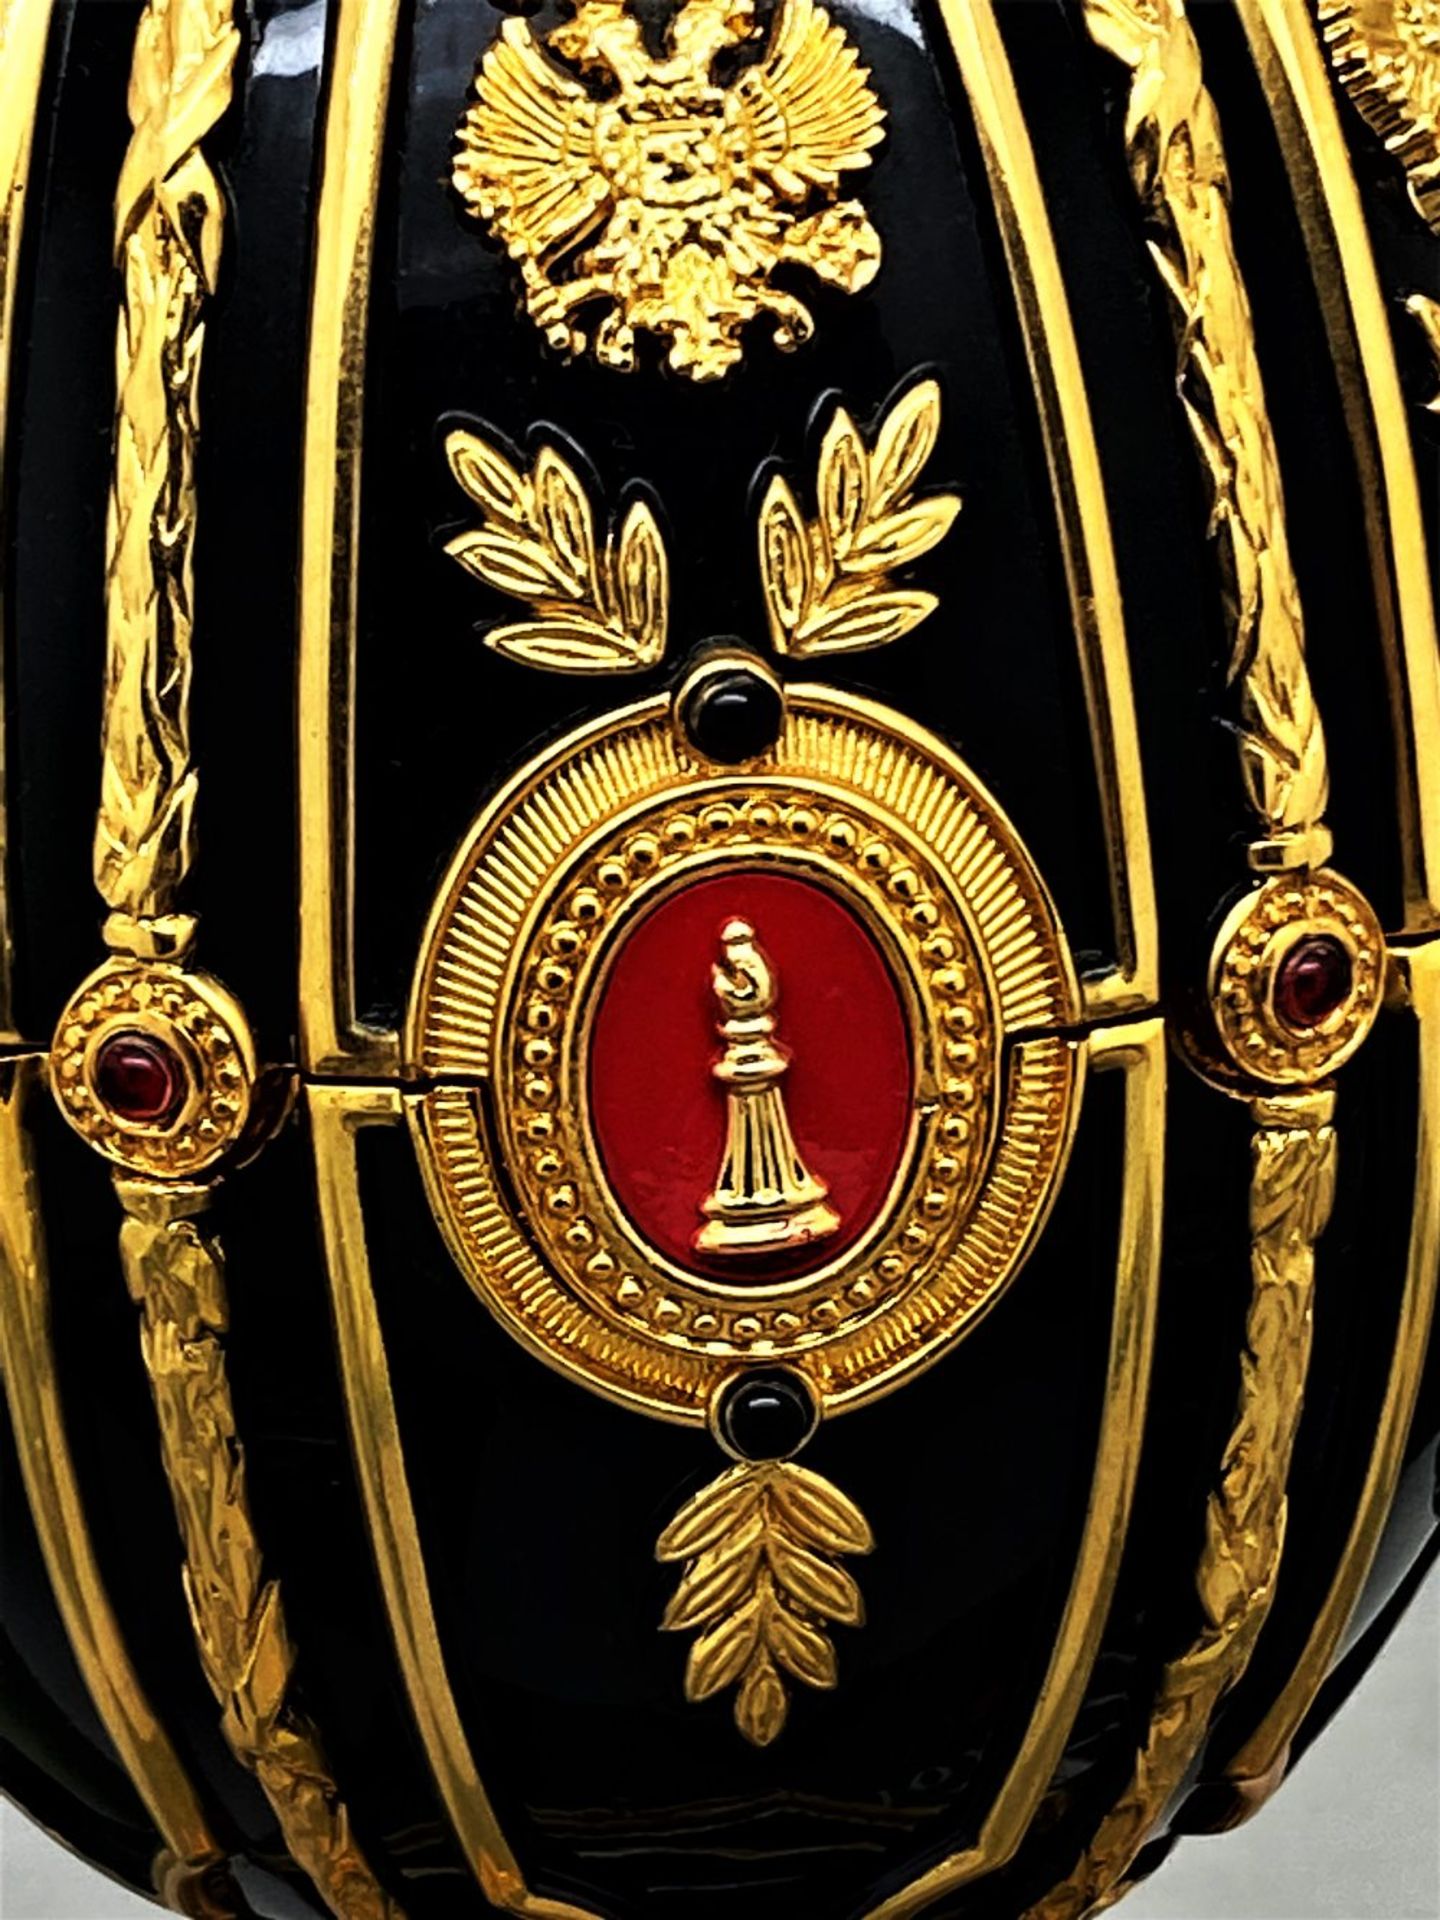 Faberge 24 Ct Gold- The Imperial Jeweled Egg Chess Set - Image 4 of 6